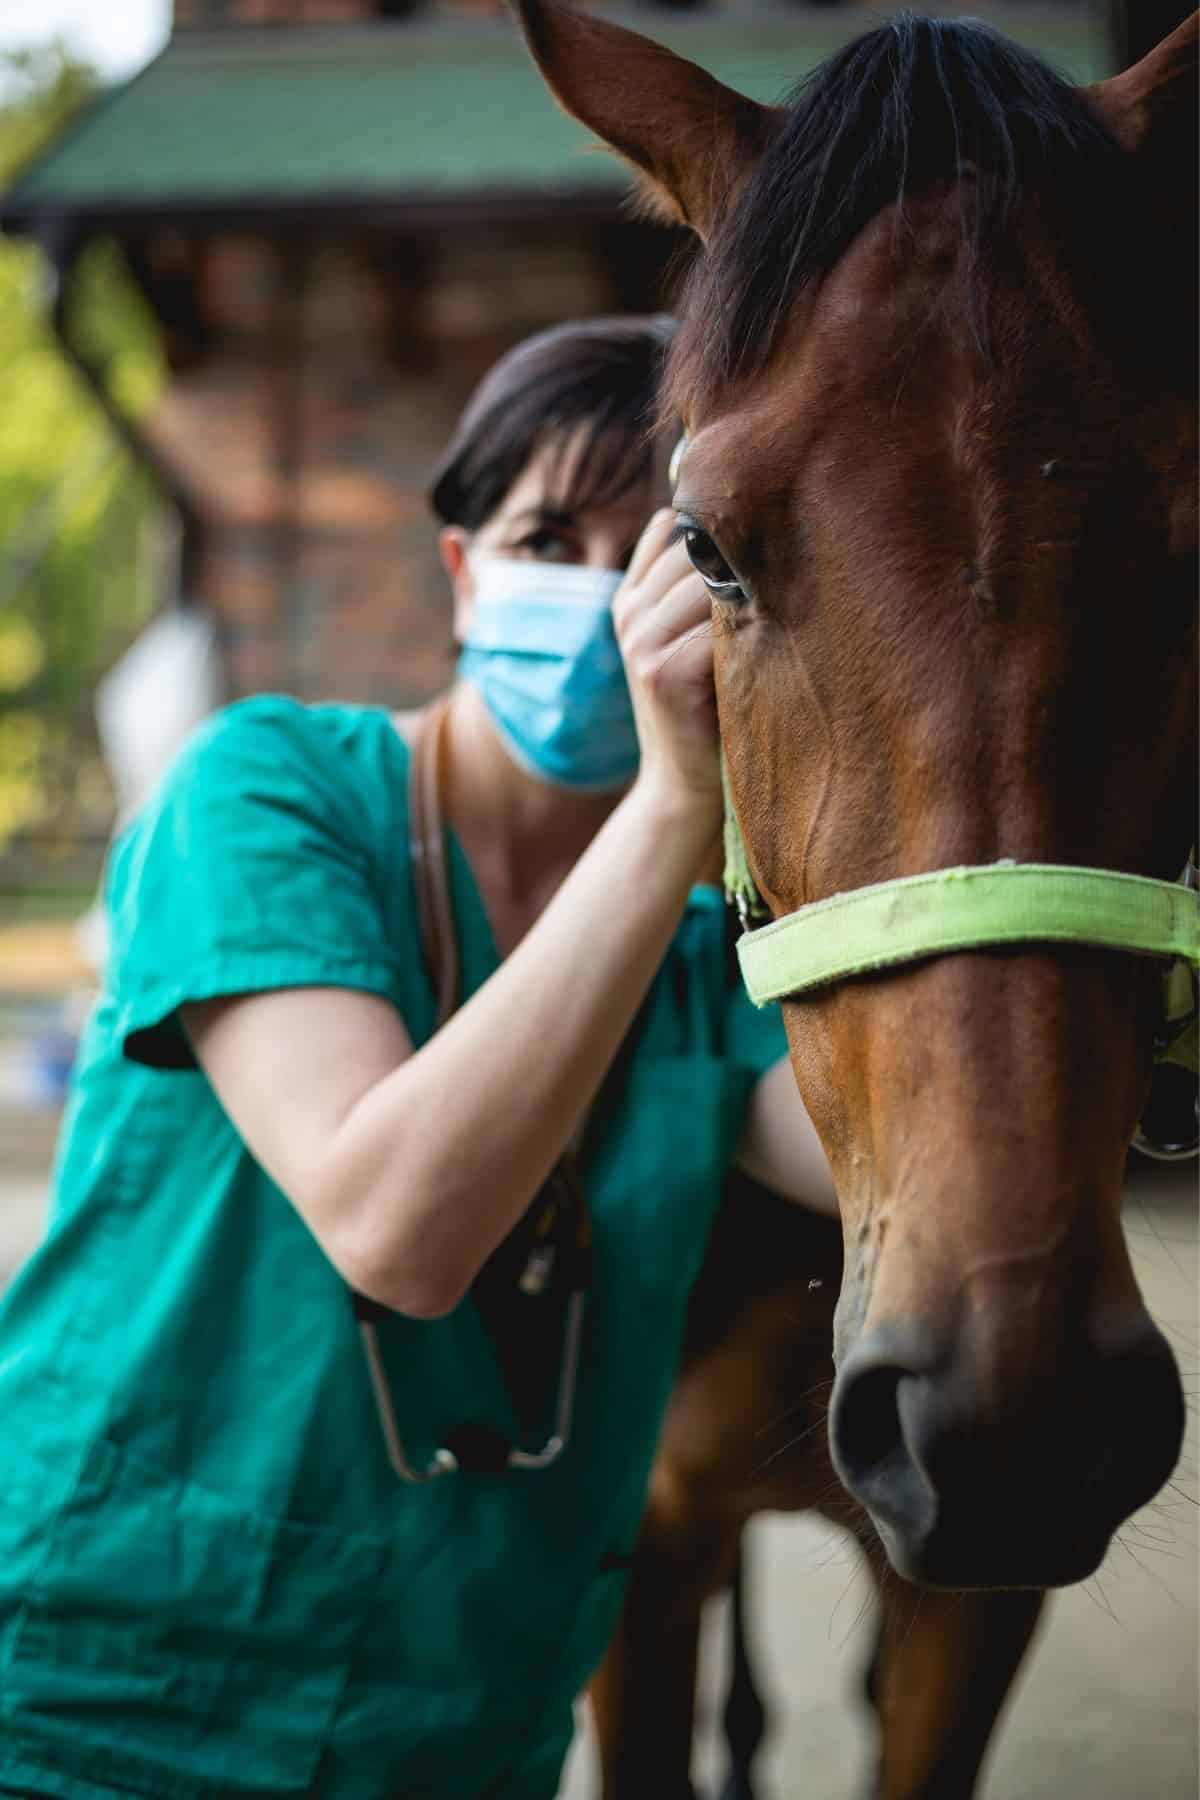 Woman in green scrubs leaning against the horse